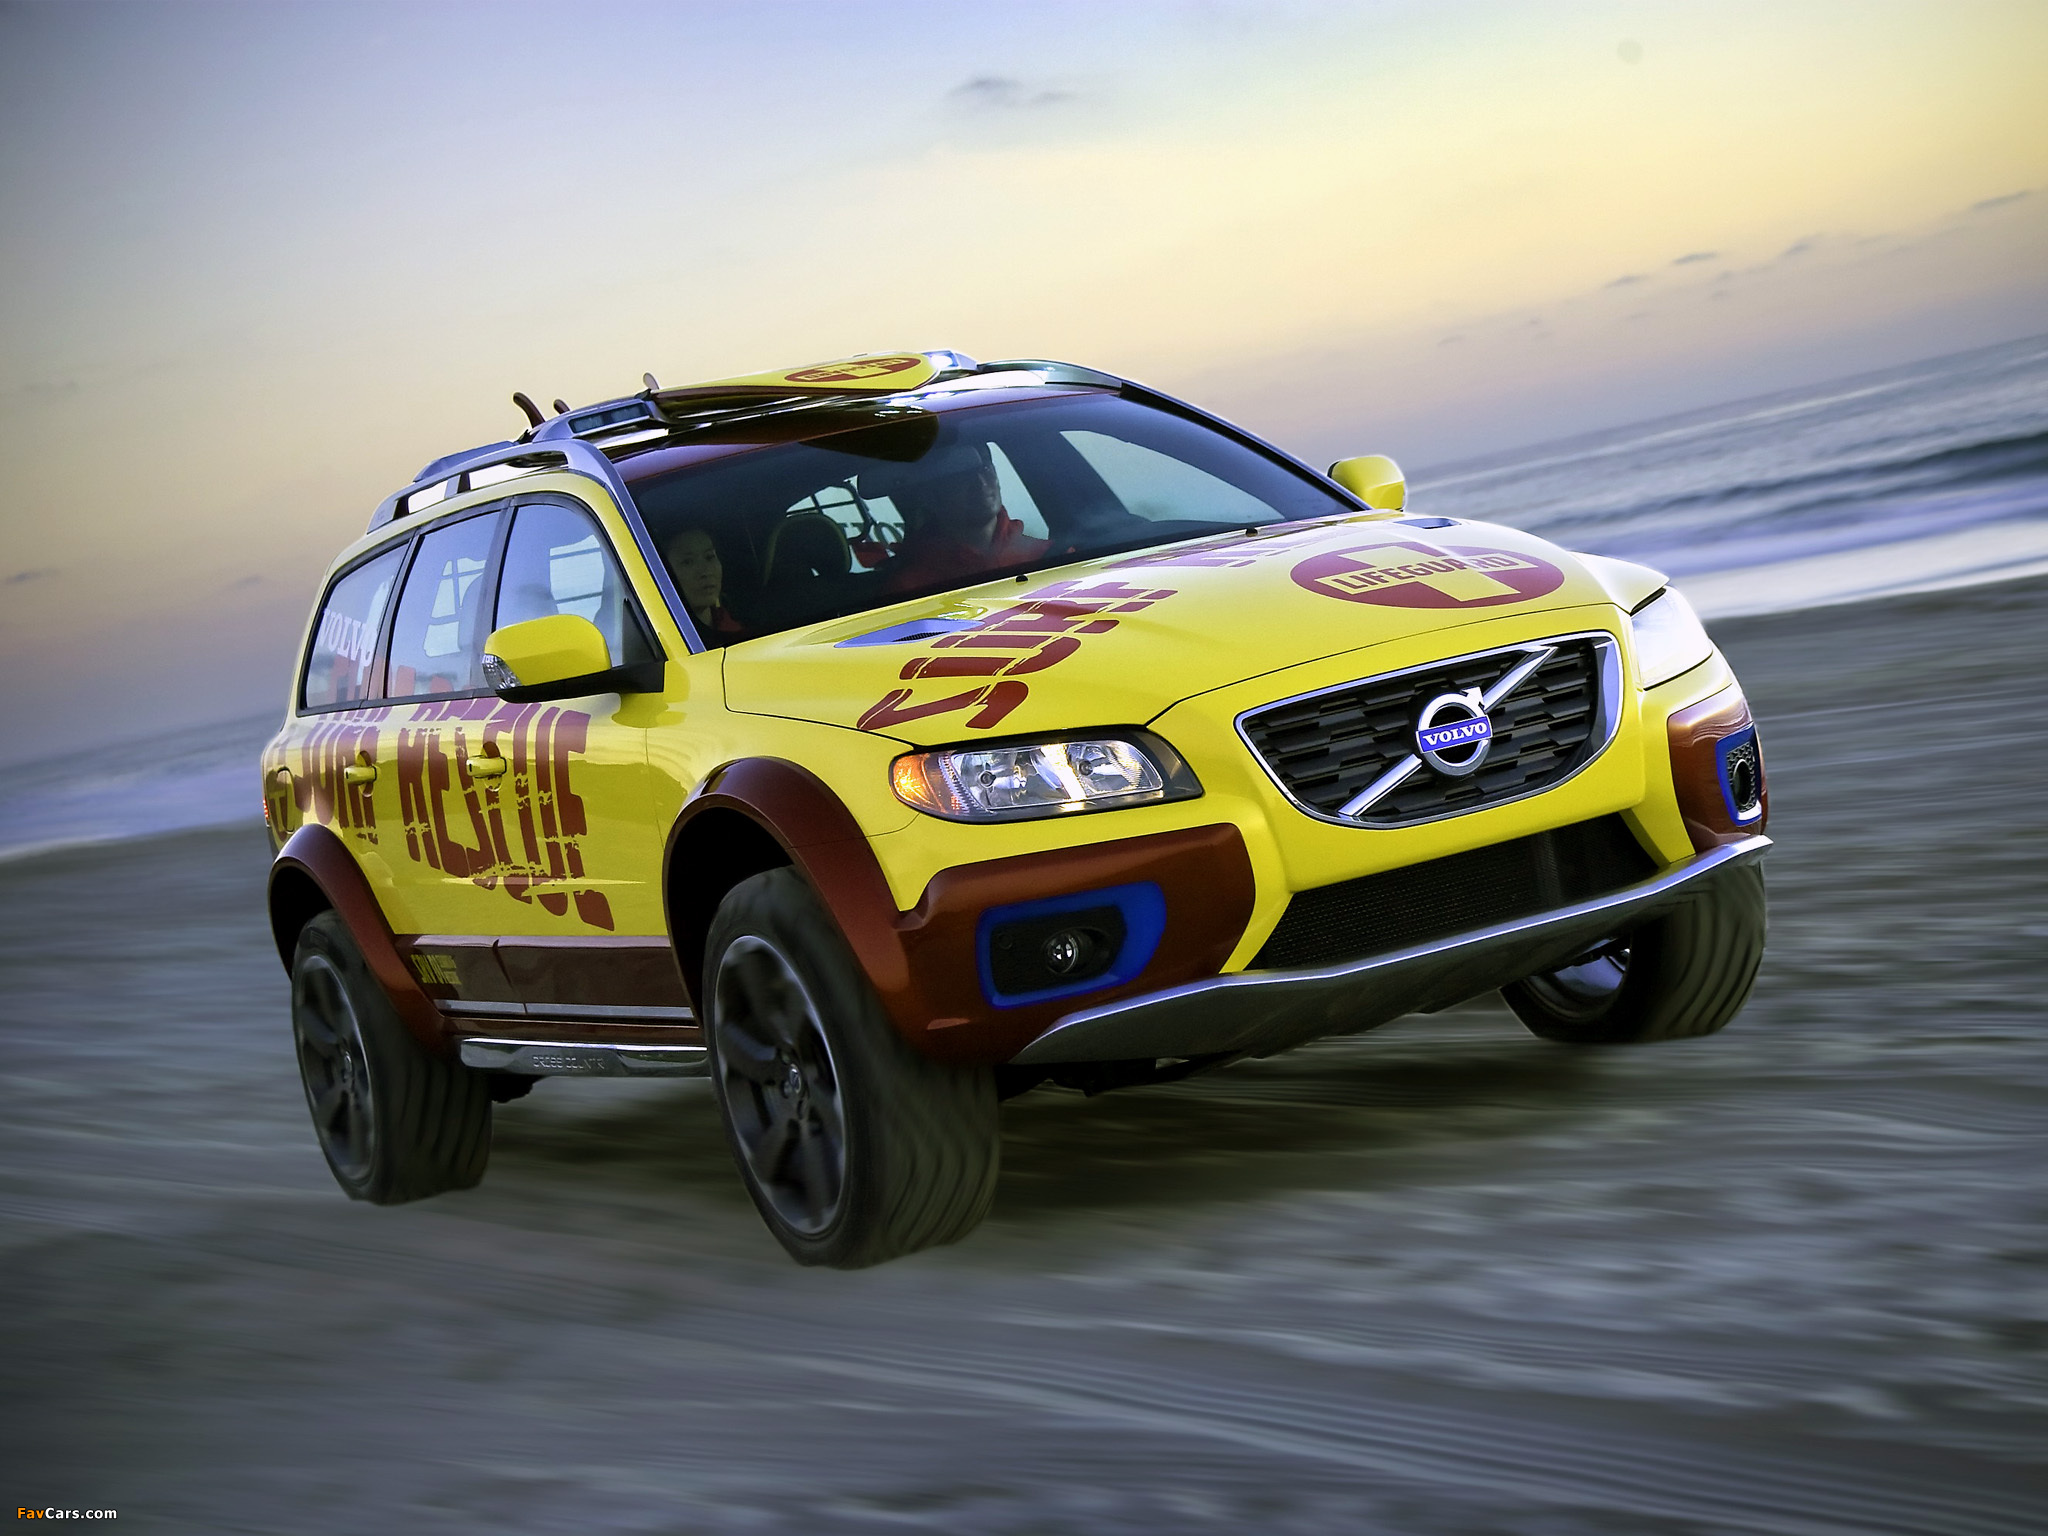 Volvo XC70 Surf Rescue Concept 2007 pictures (2048 x 1536)